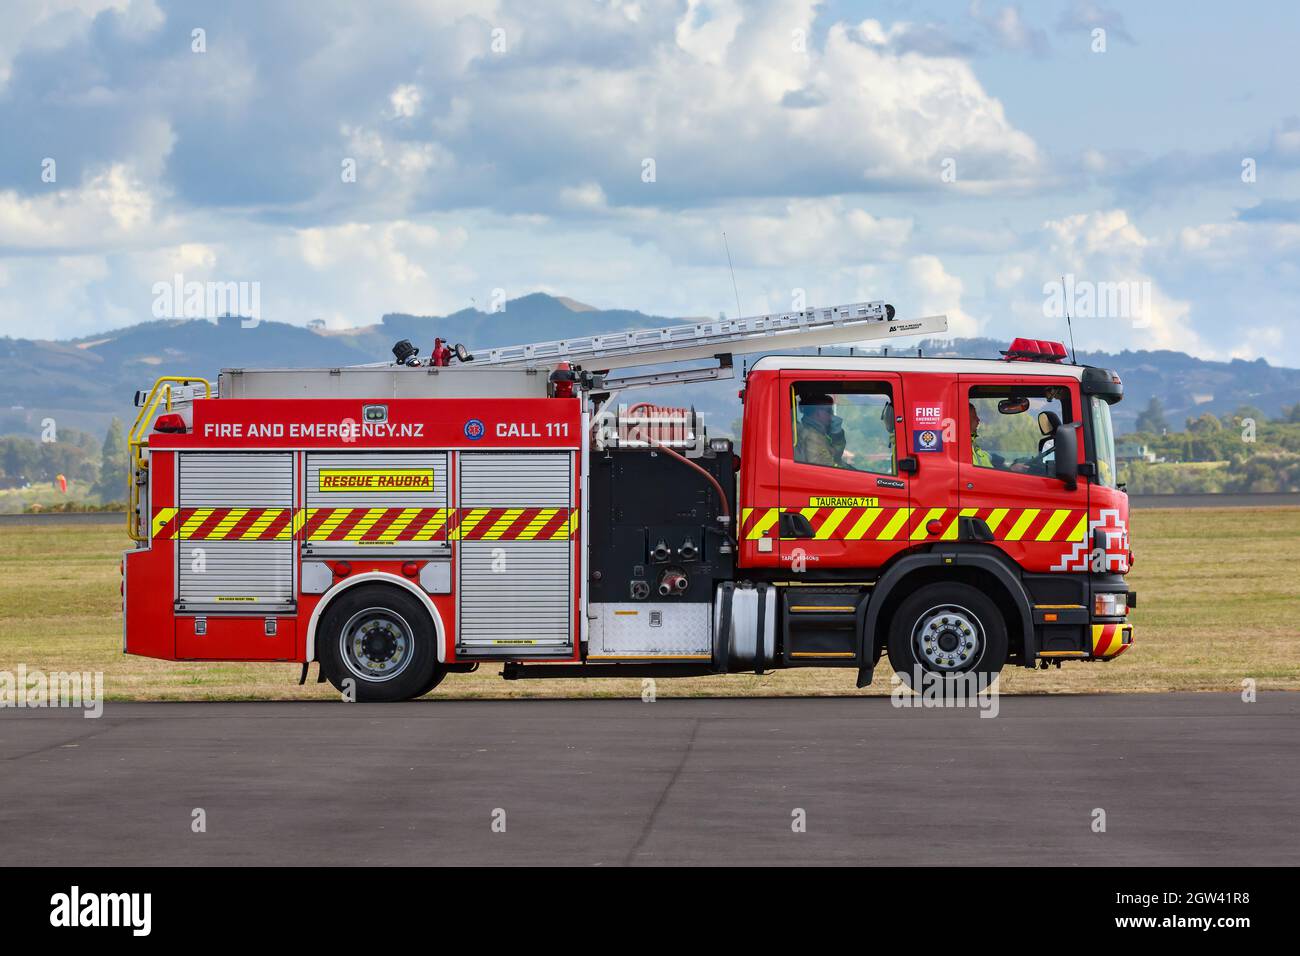 A Fire and Emergency New Zealand fire engine parked on the runway at Tauranga Airport Stock Photo